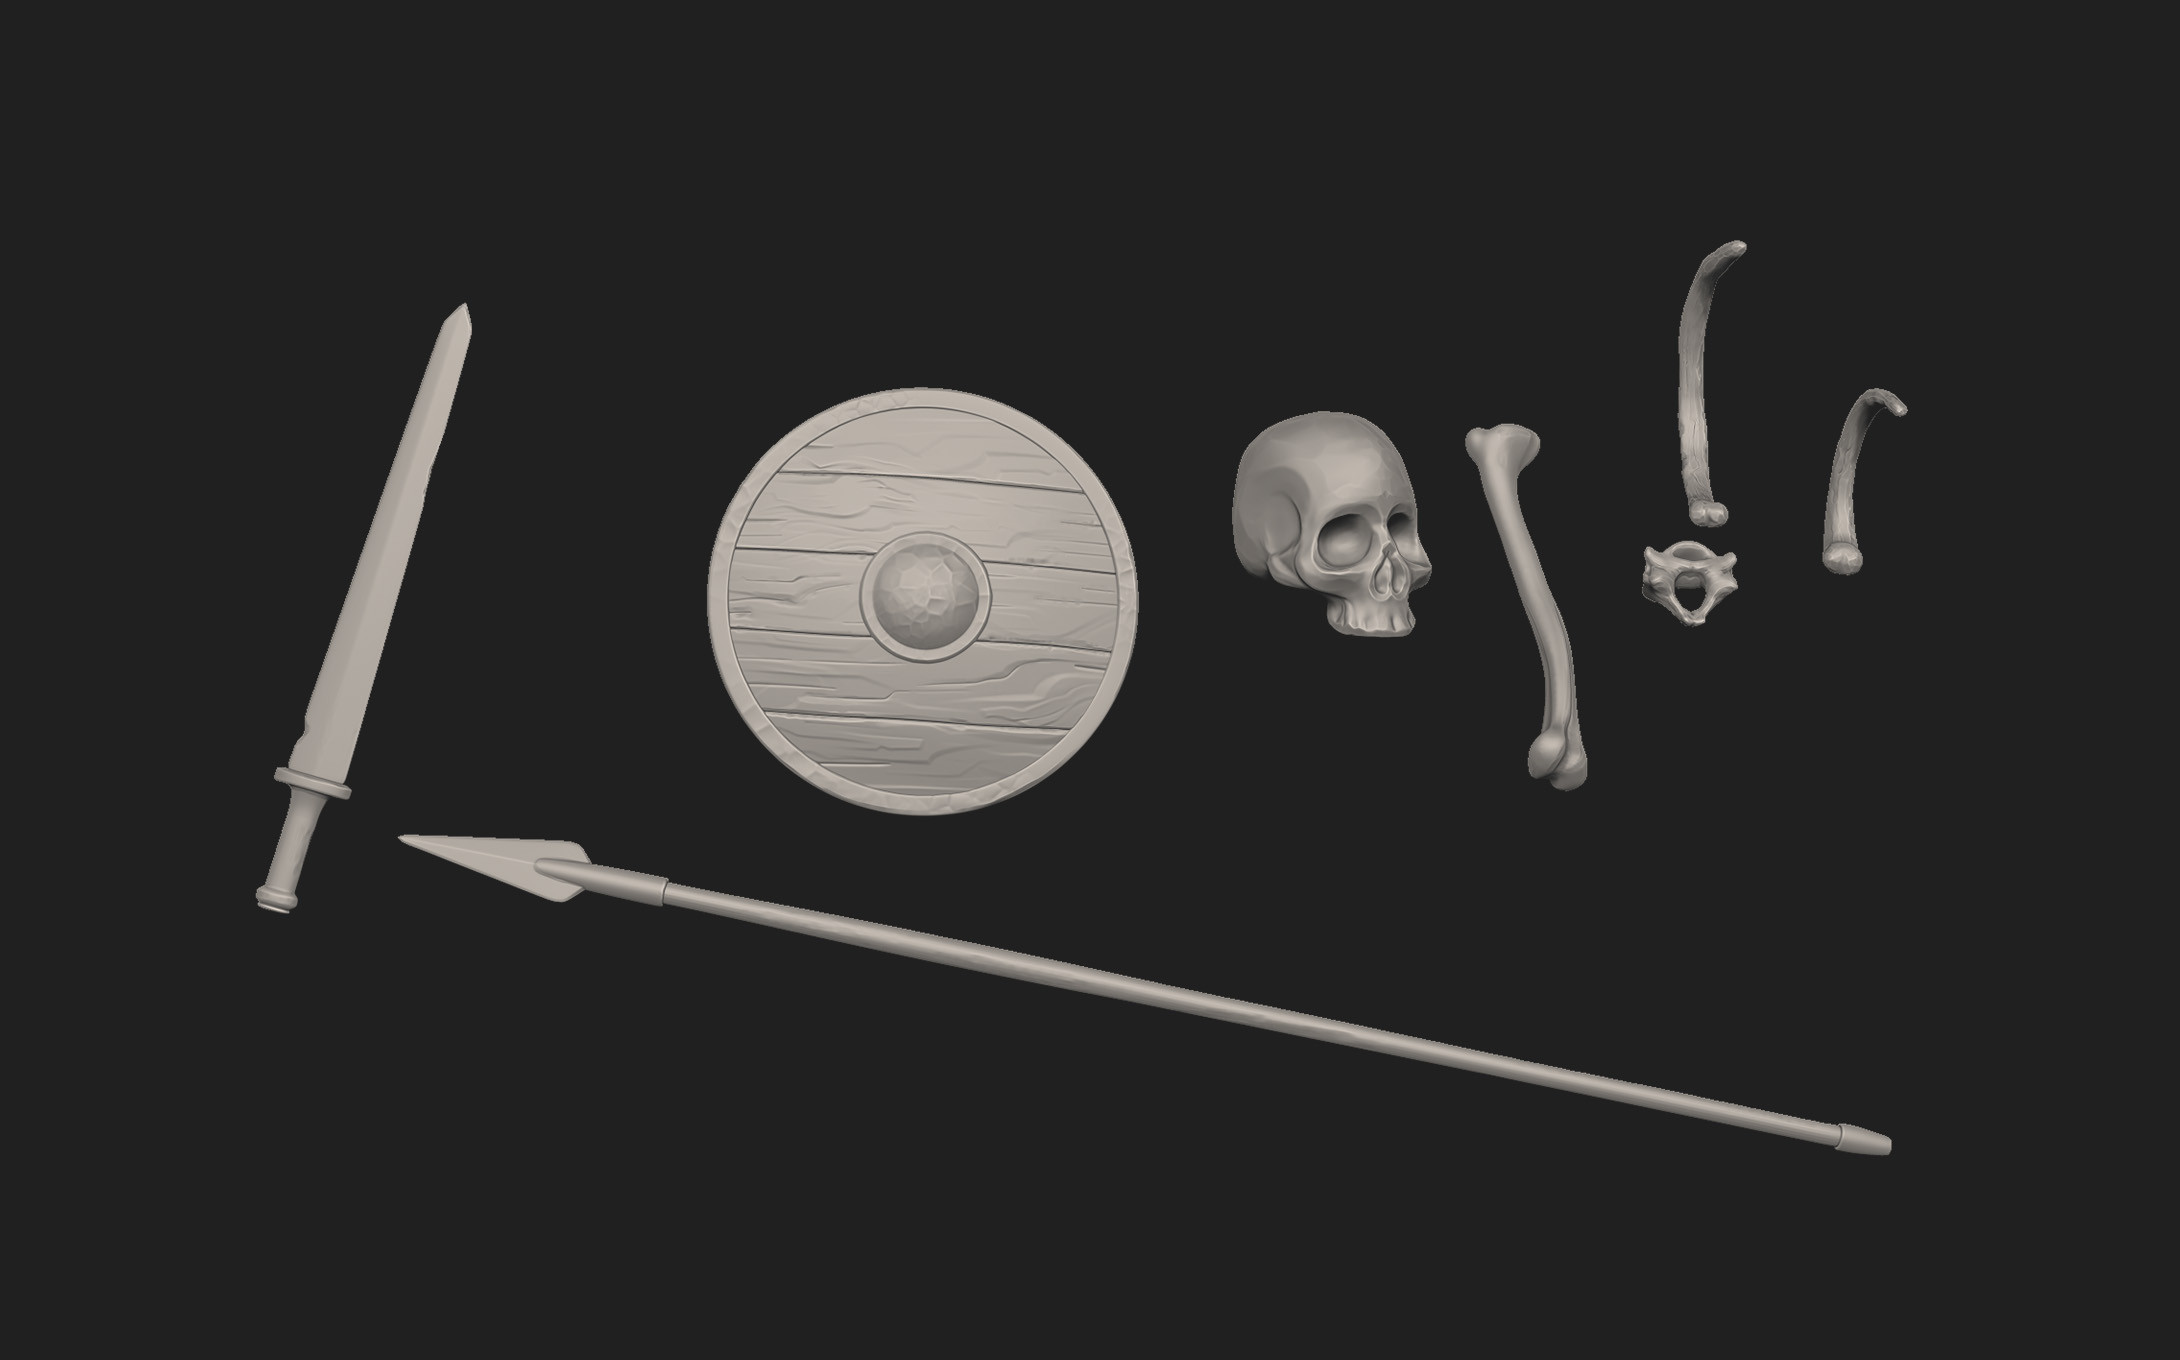 Some simple sculpts for the smaller assets scattered around